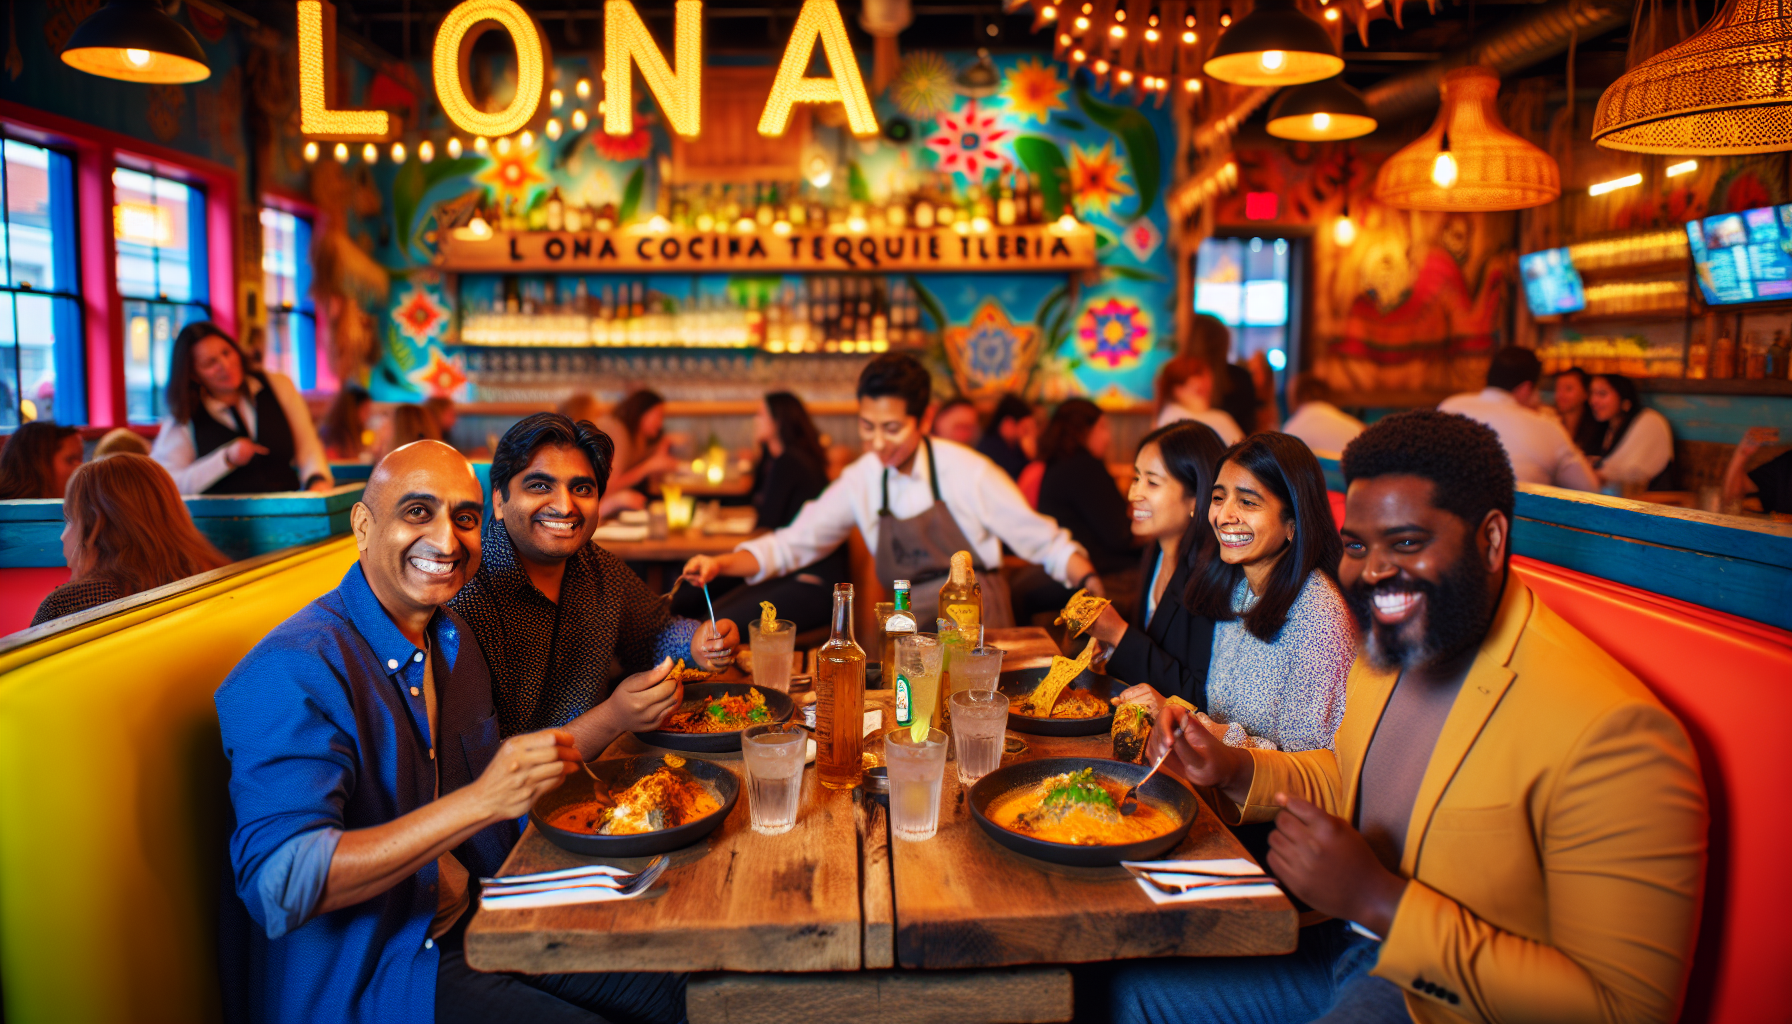 Happy customers enjoying their meal at Lona Cocina Tequileria